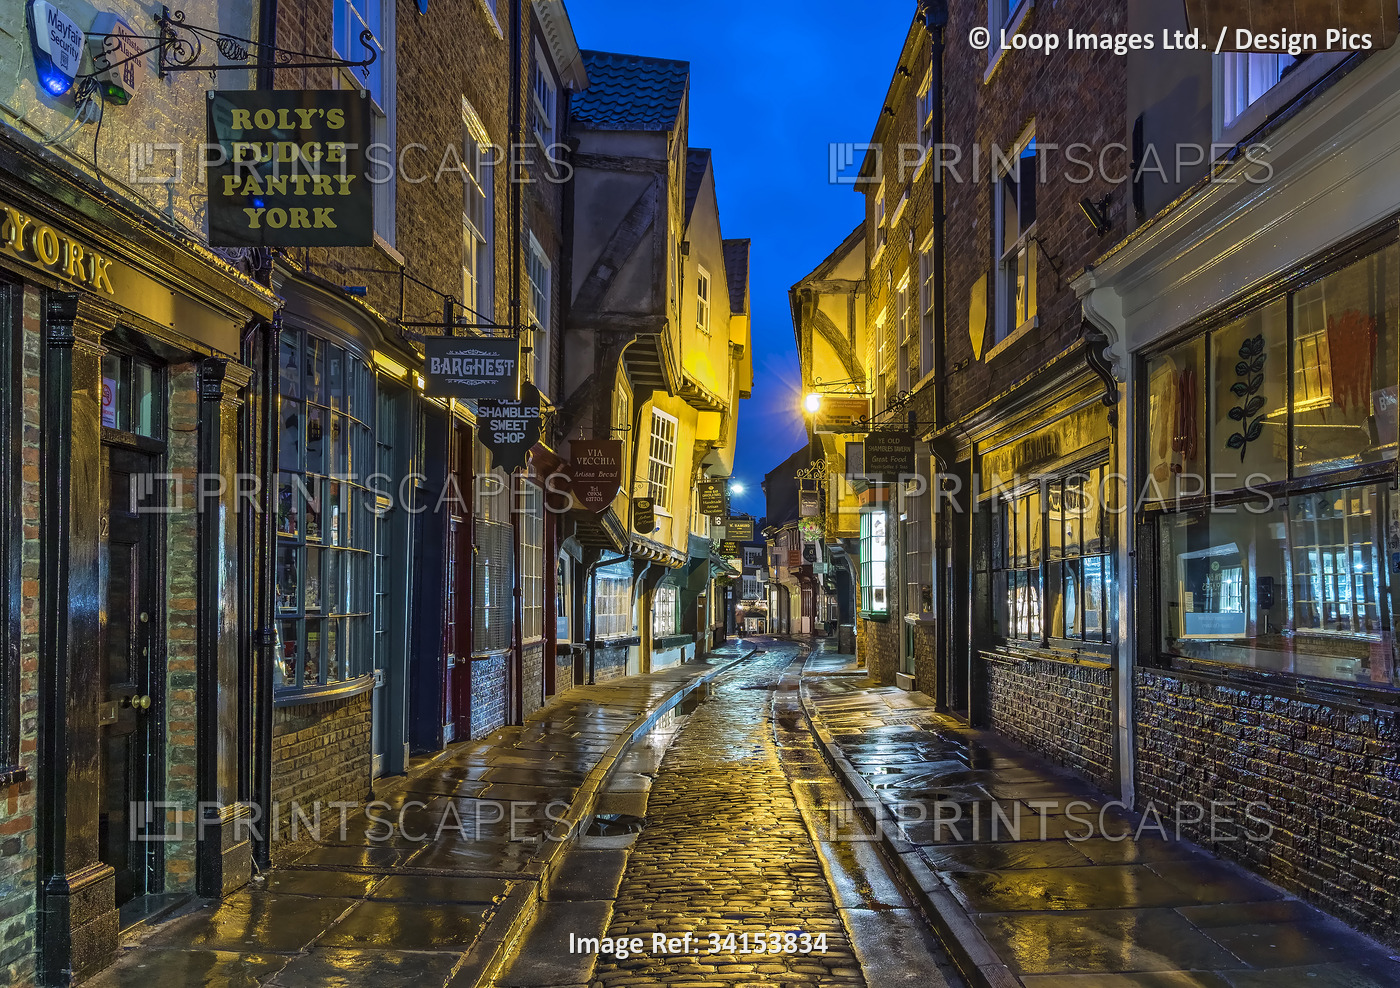 The historic medieval Shambles street at night in the city of York.